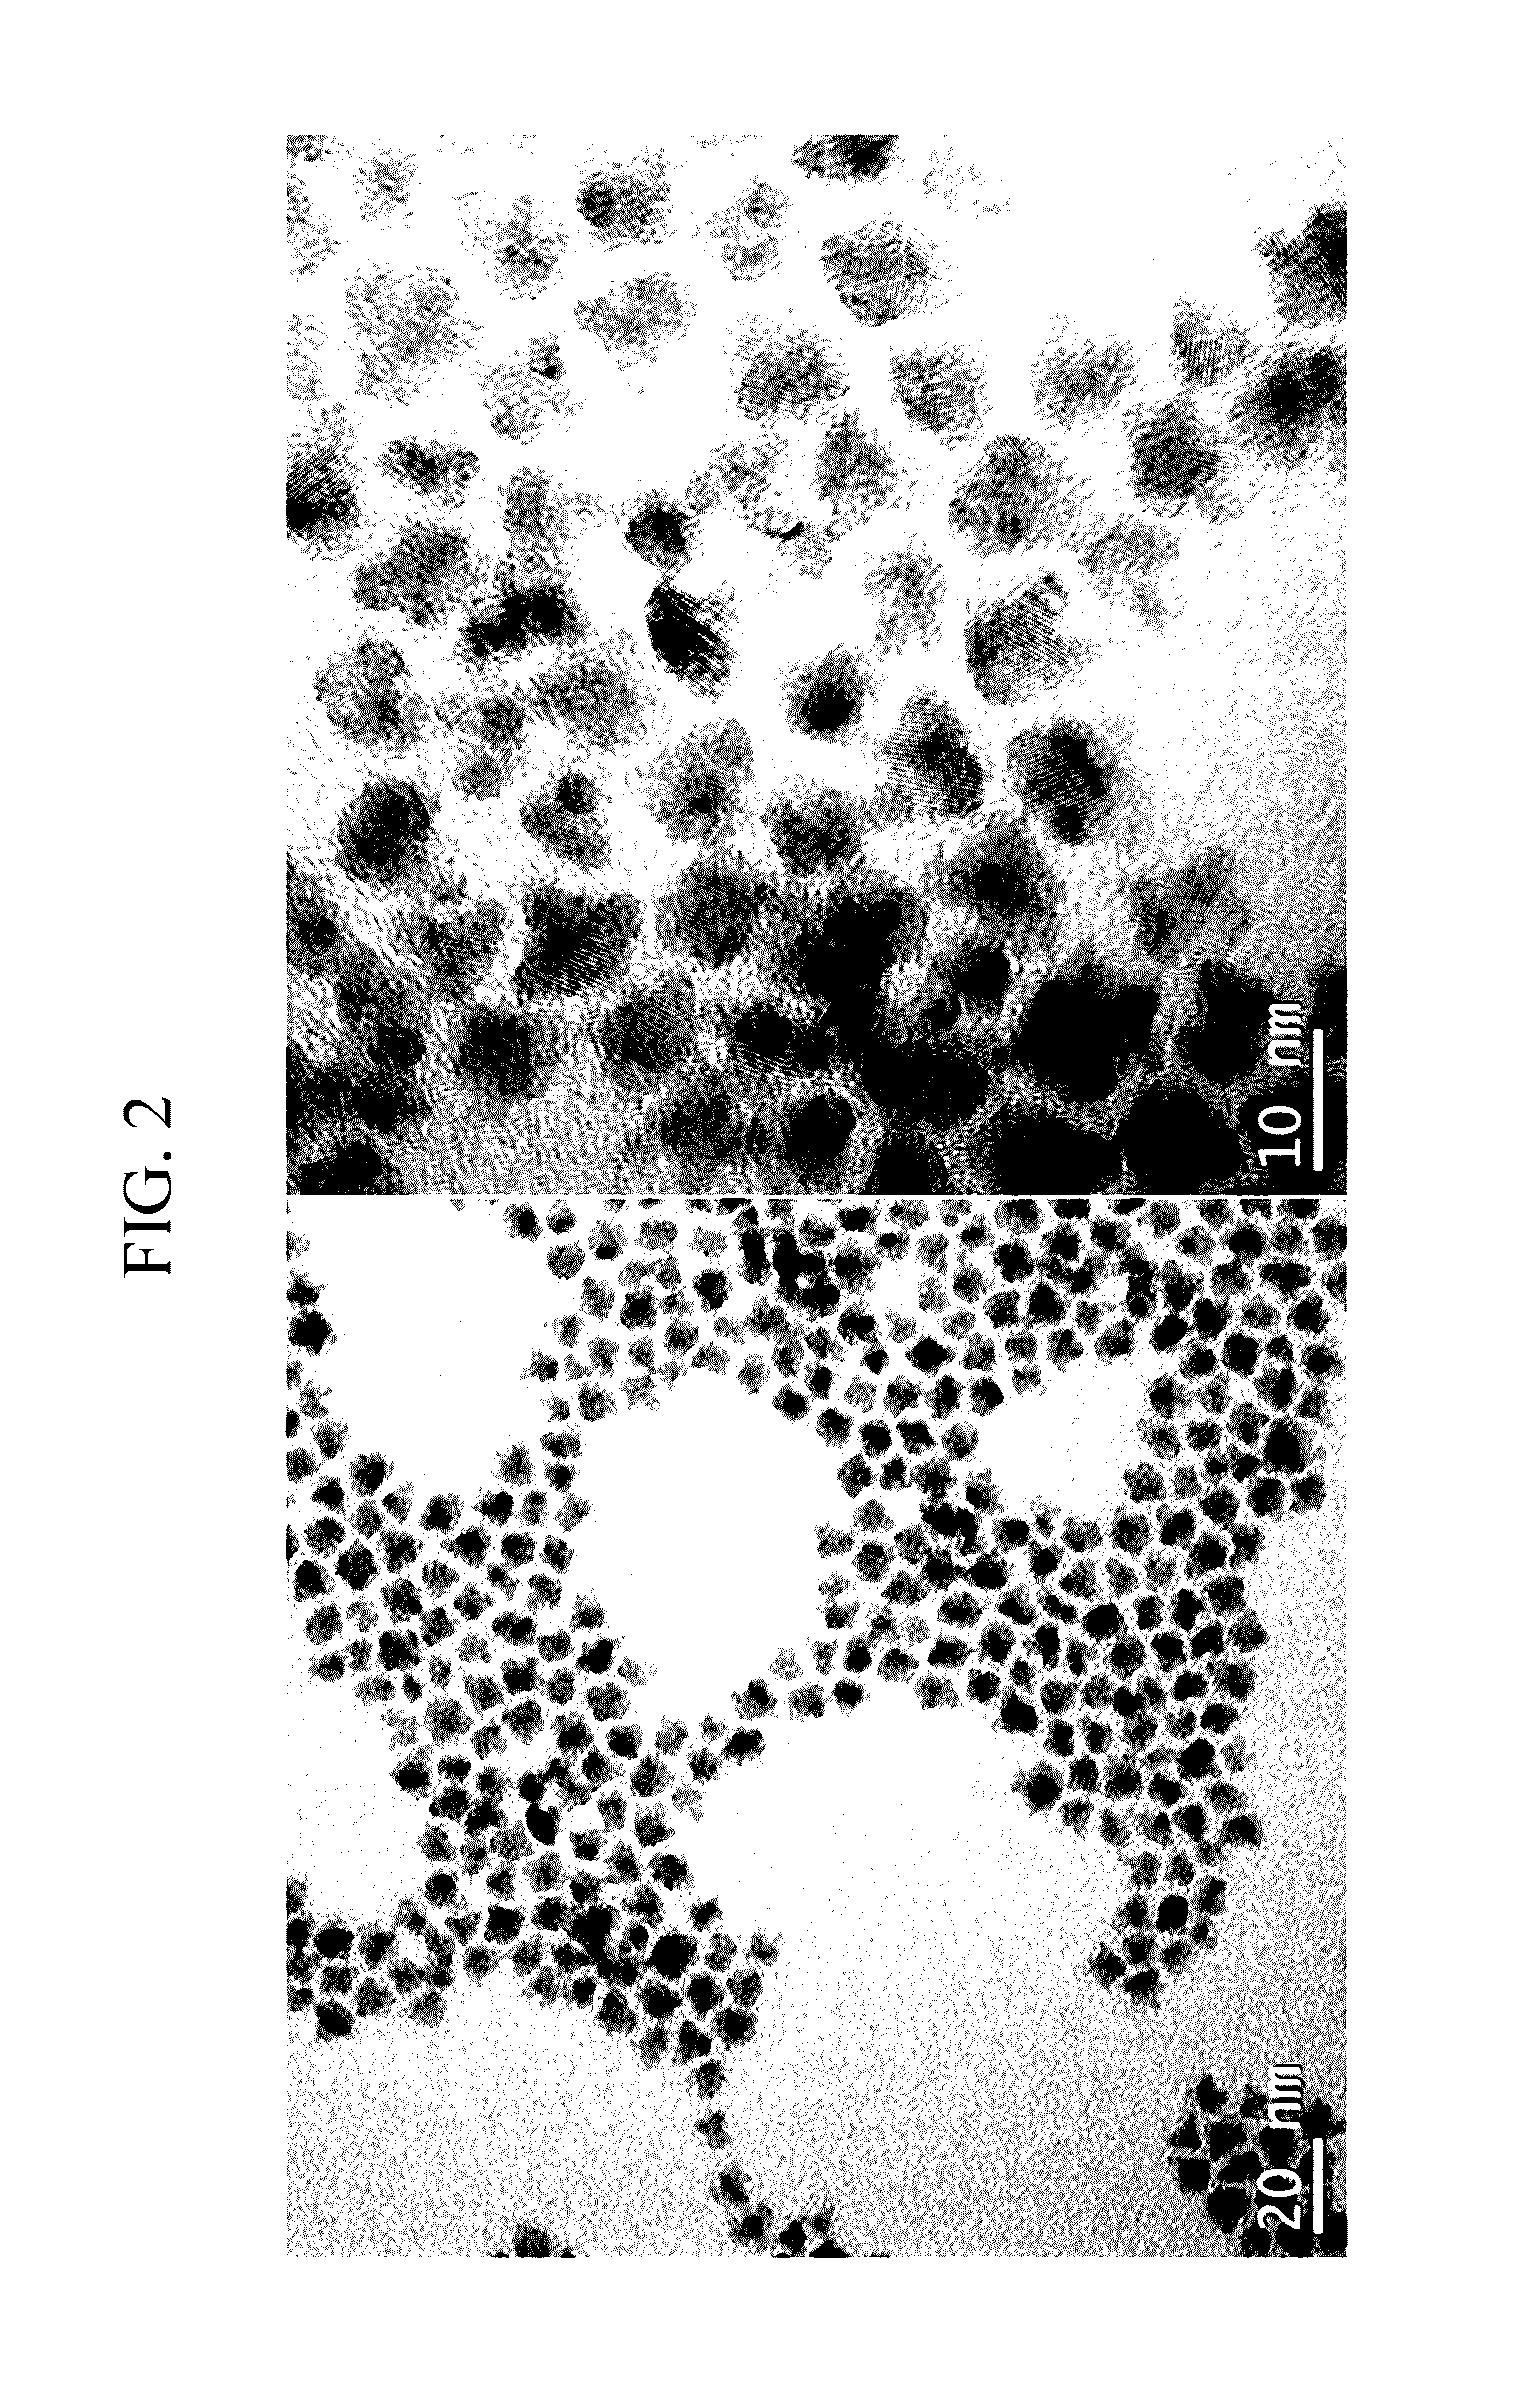 Methods of removing surface ligand compounds